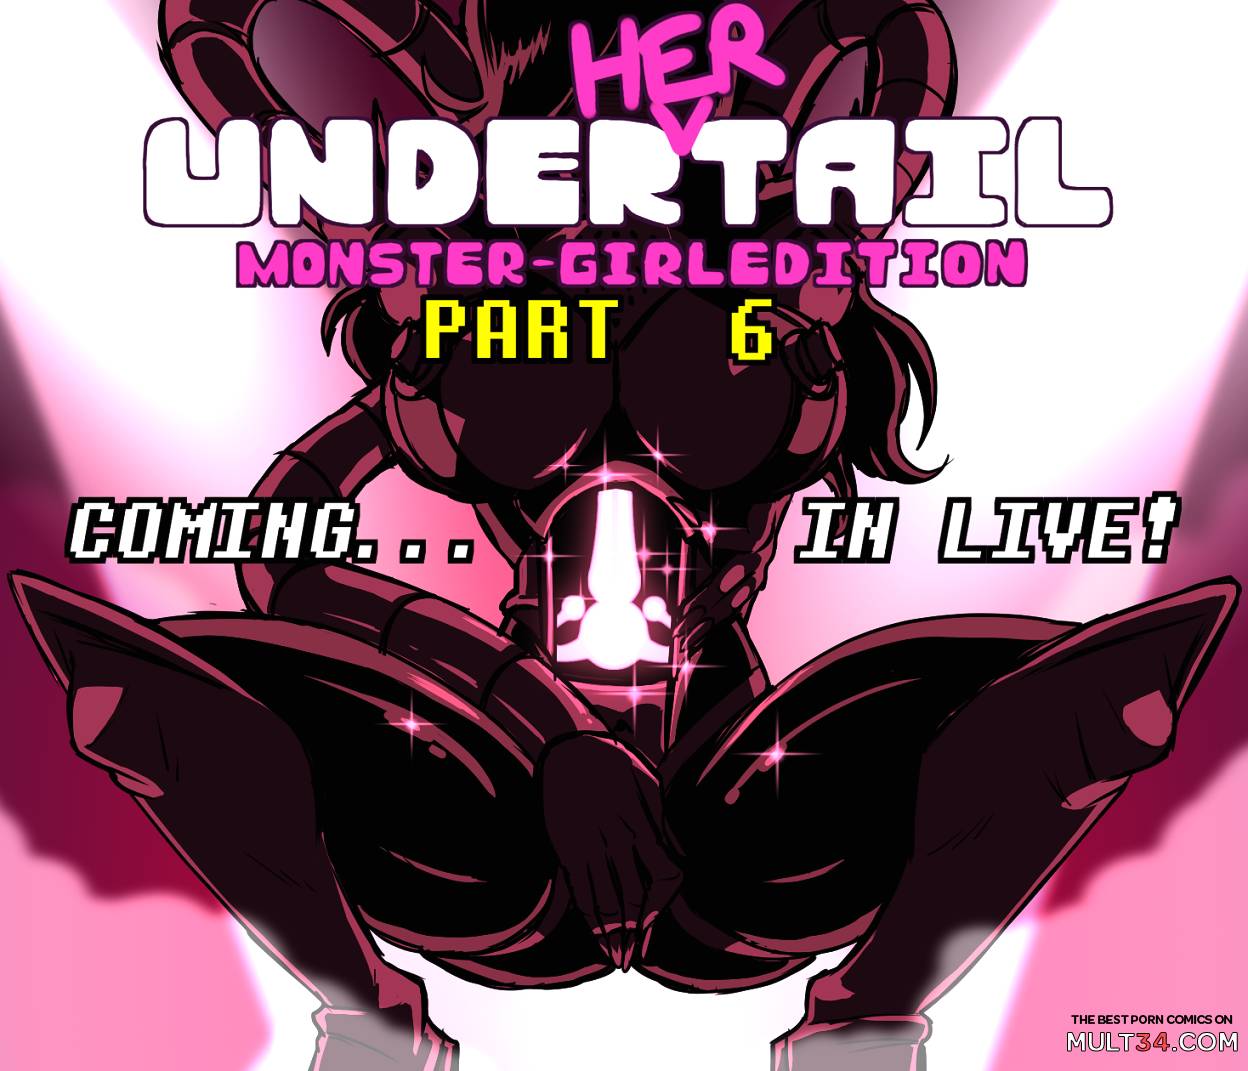 Under her tail porn comic download